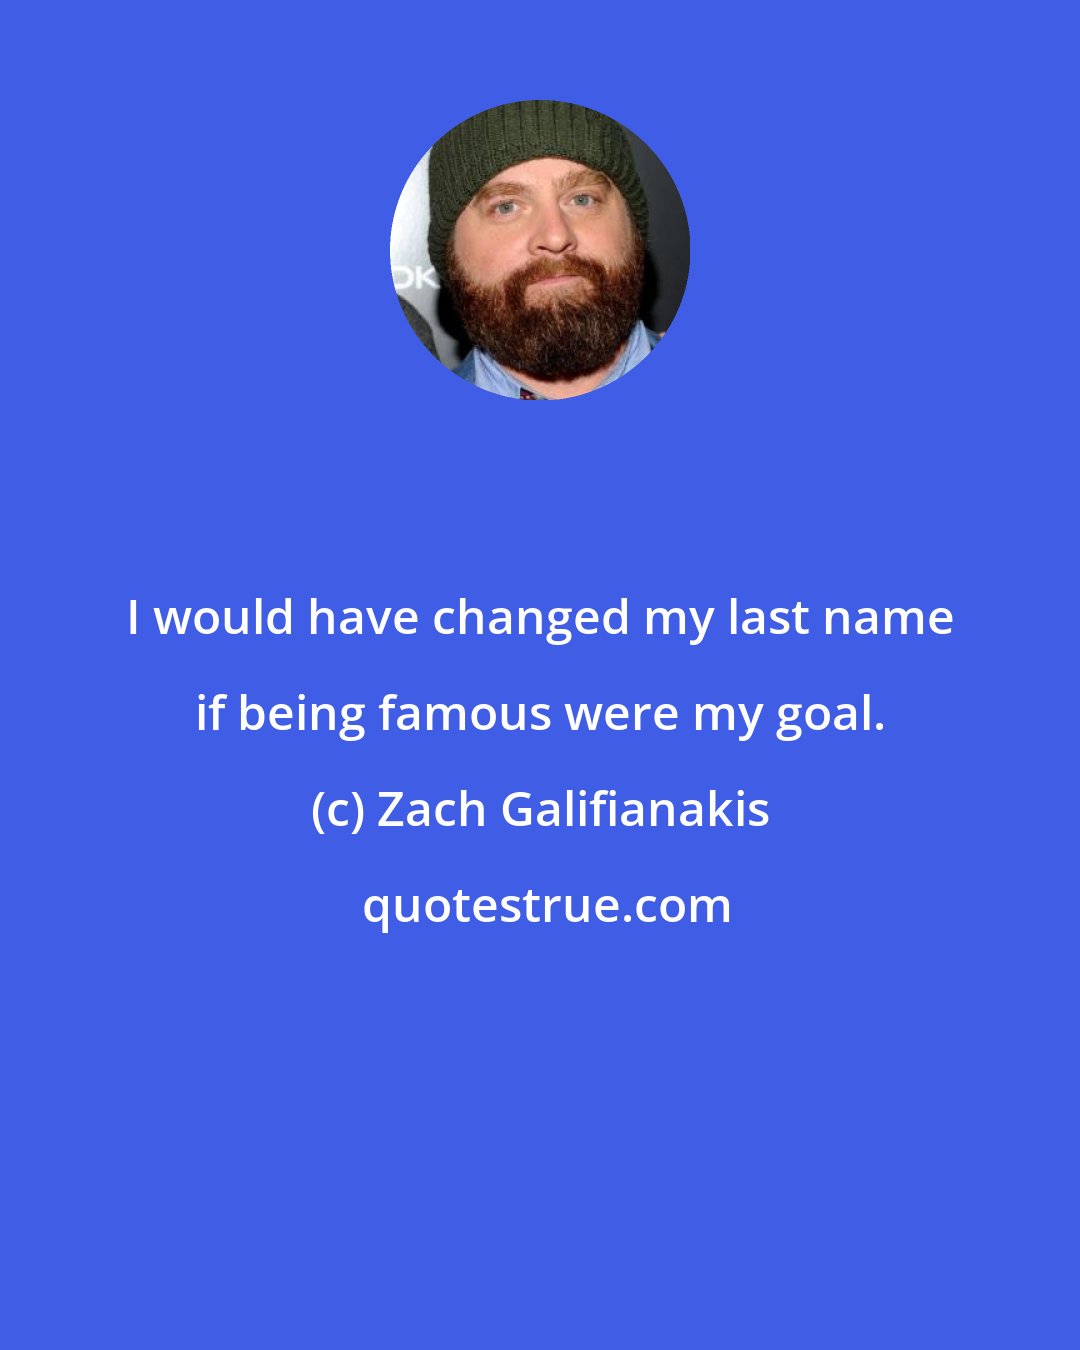 Zach Galifianakis: I would have changed my last name if being famous were my goal.